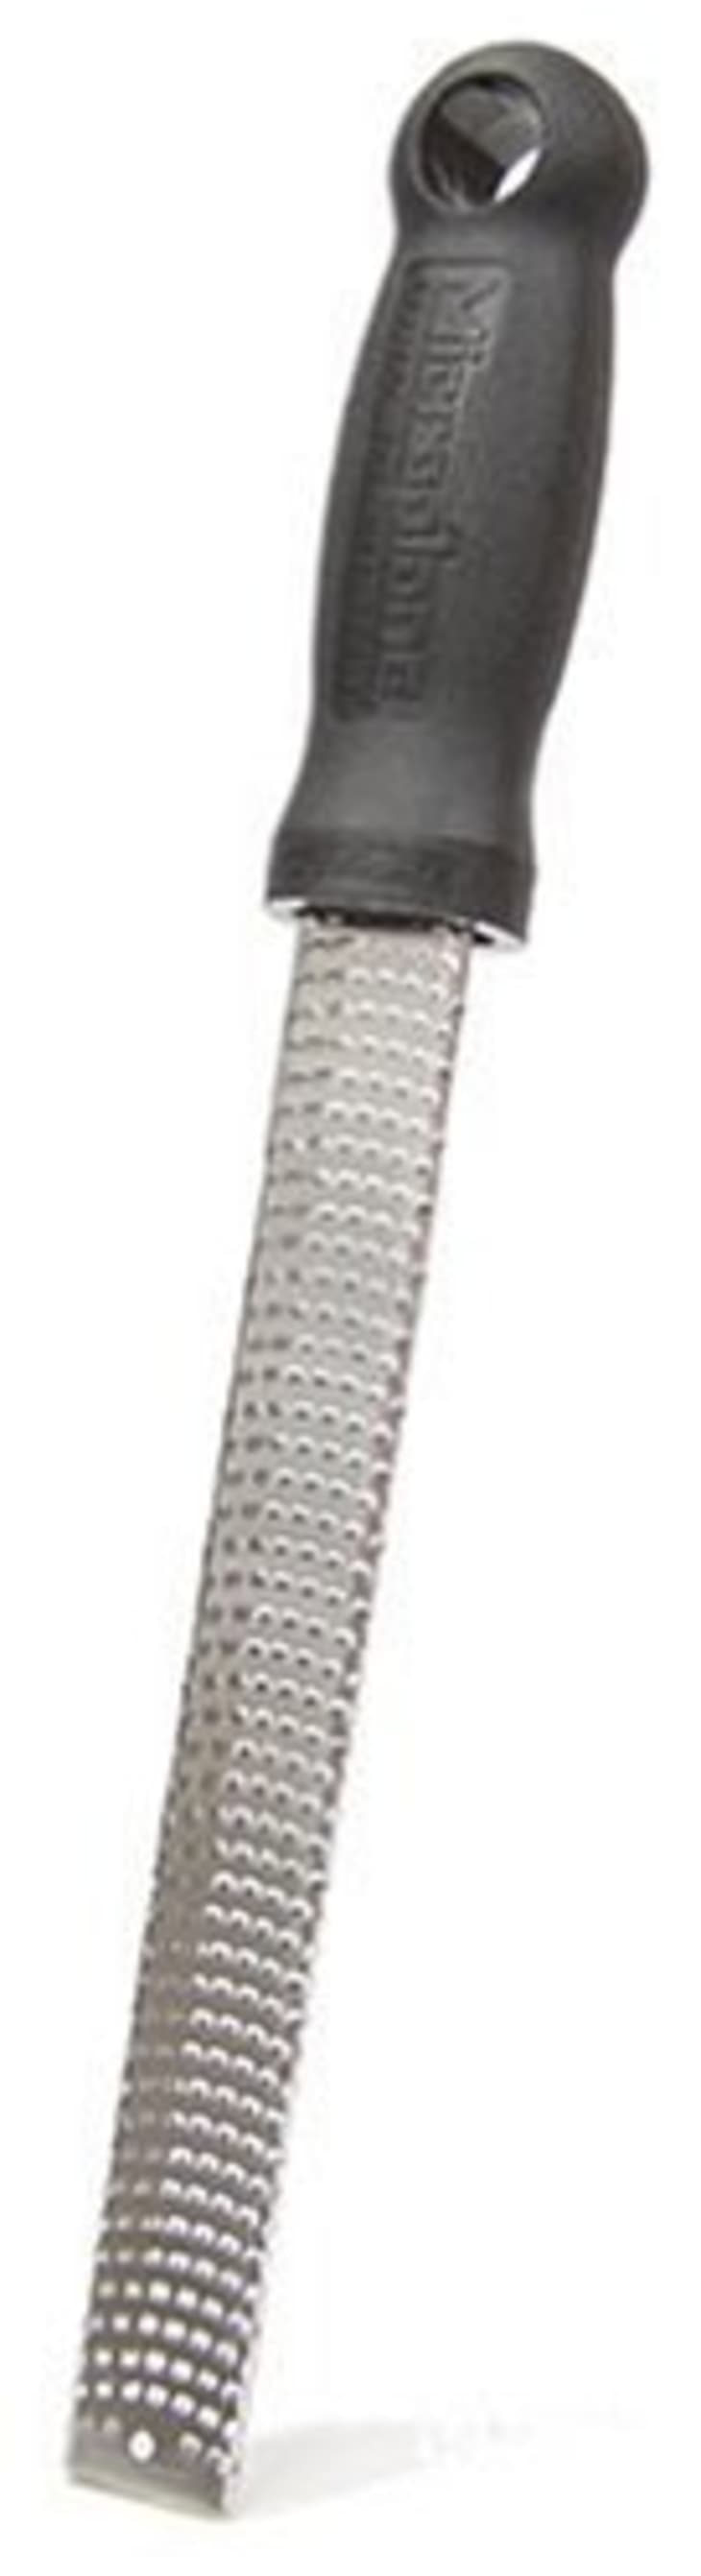 Microplane Classic Zester/Grater at Amazon